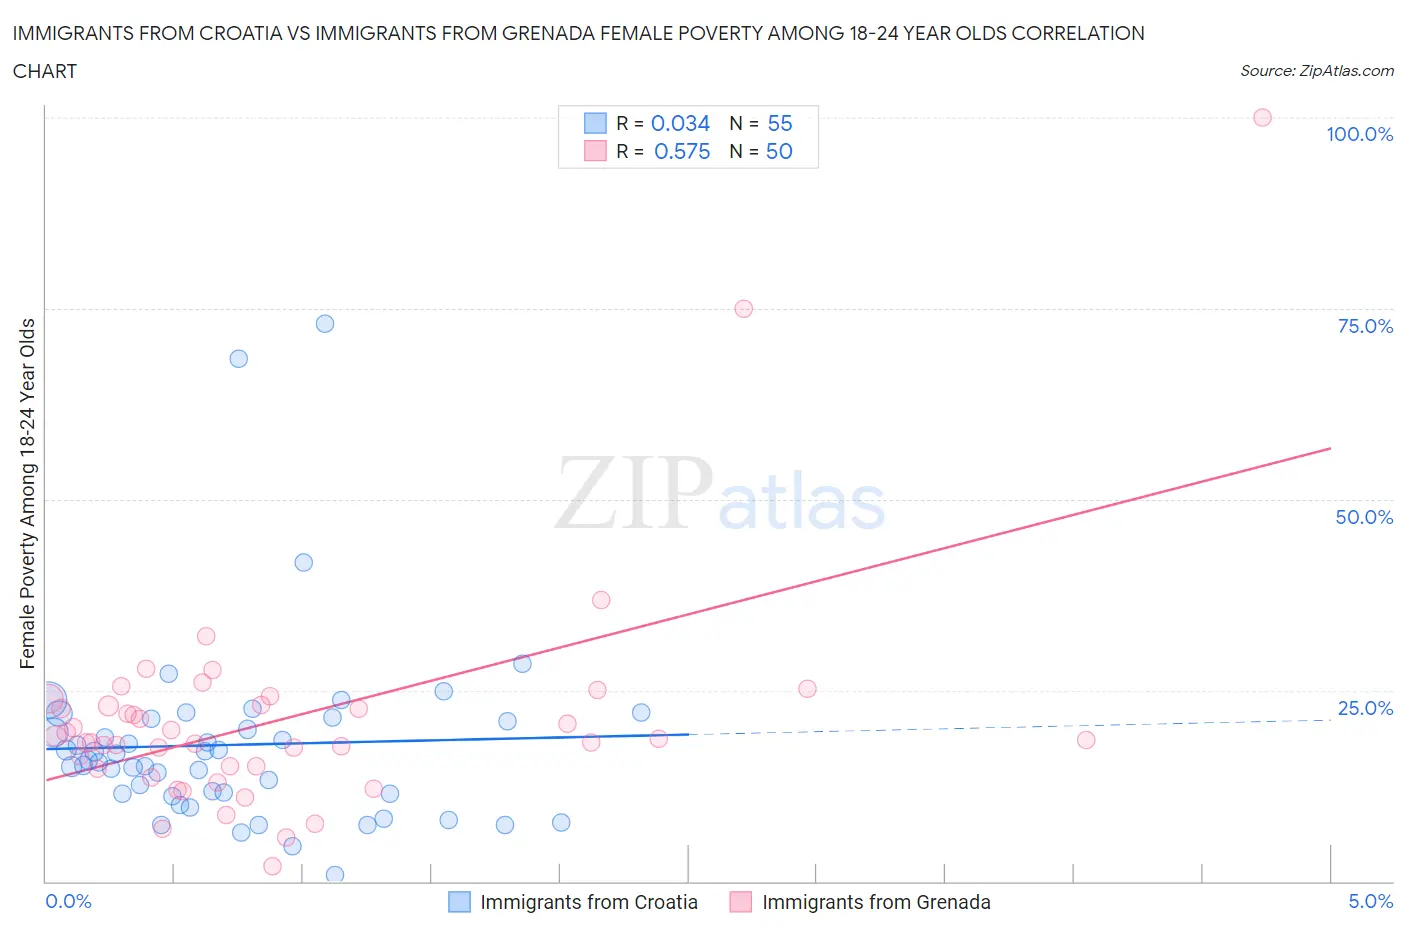 Immigrants from Croatia vs Immigrants from Grenada Female Poverty Among 18-24 Year Olds